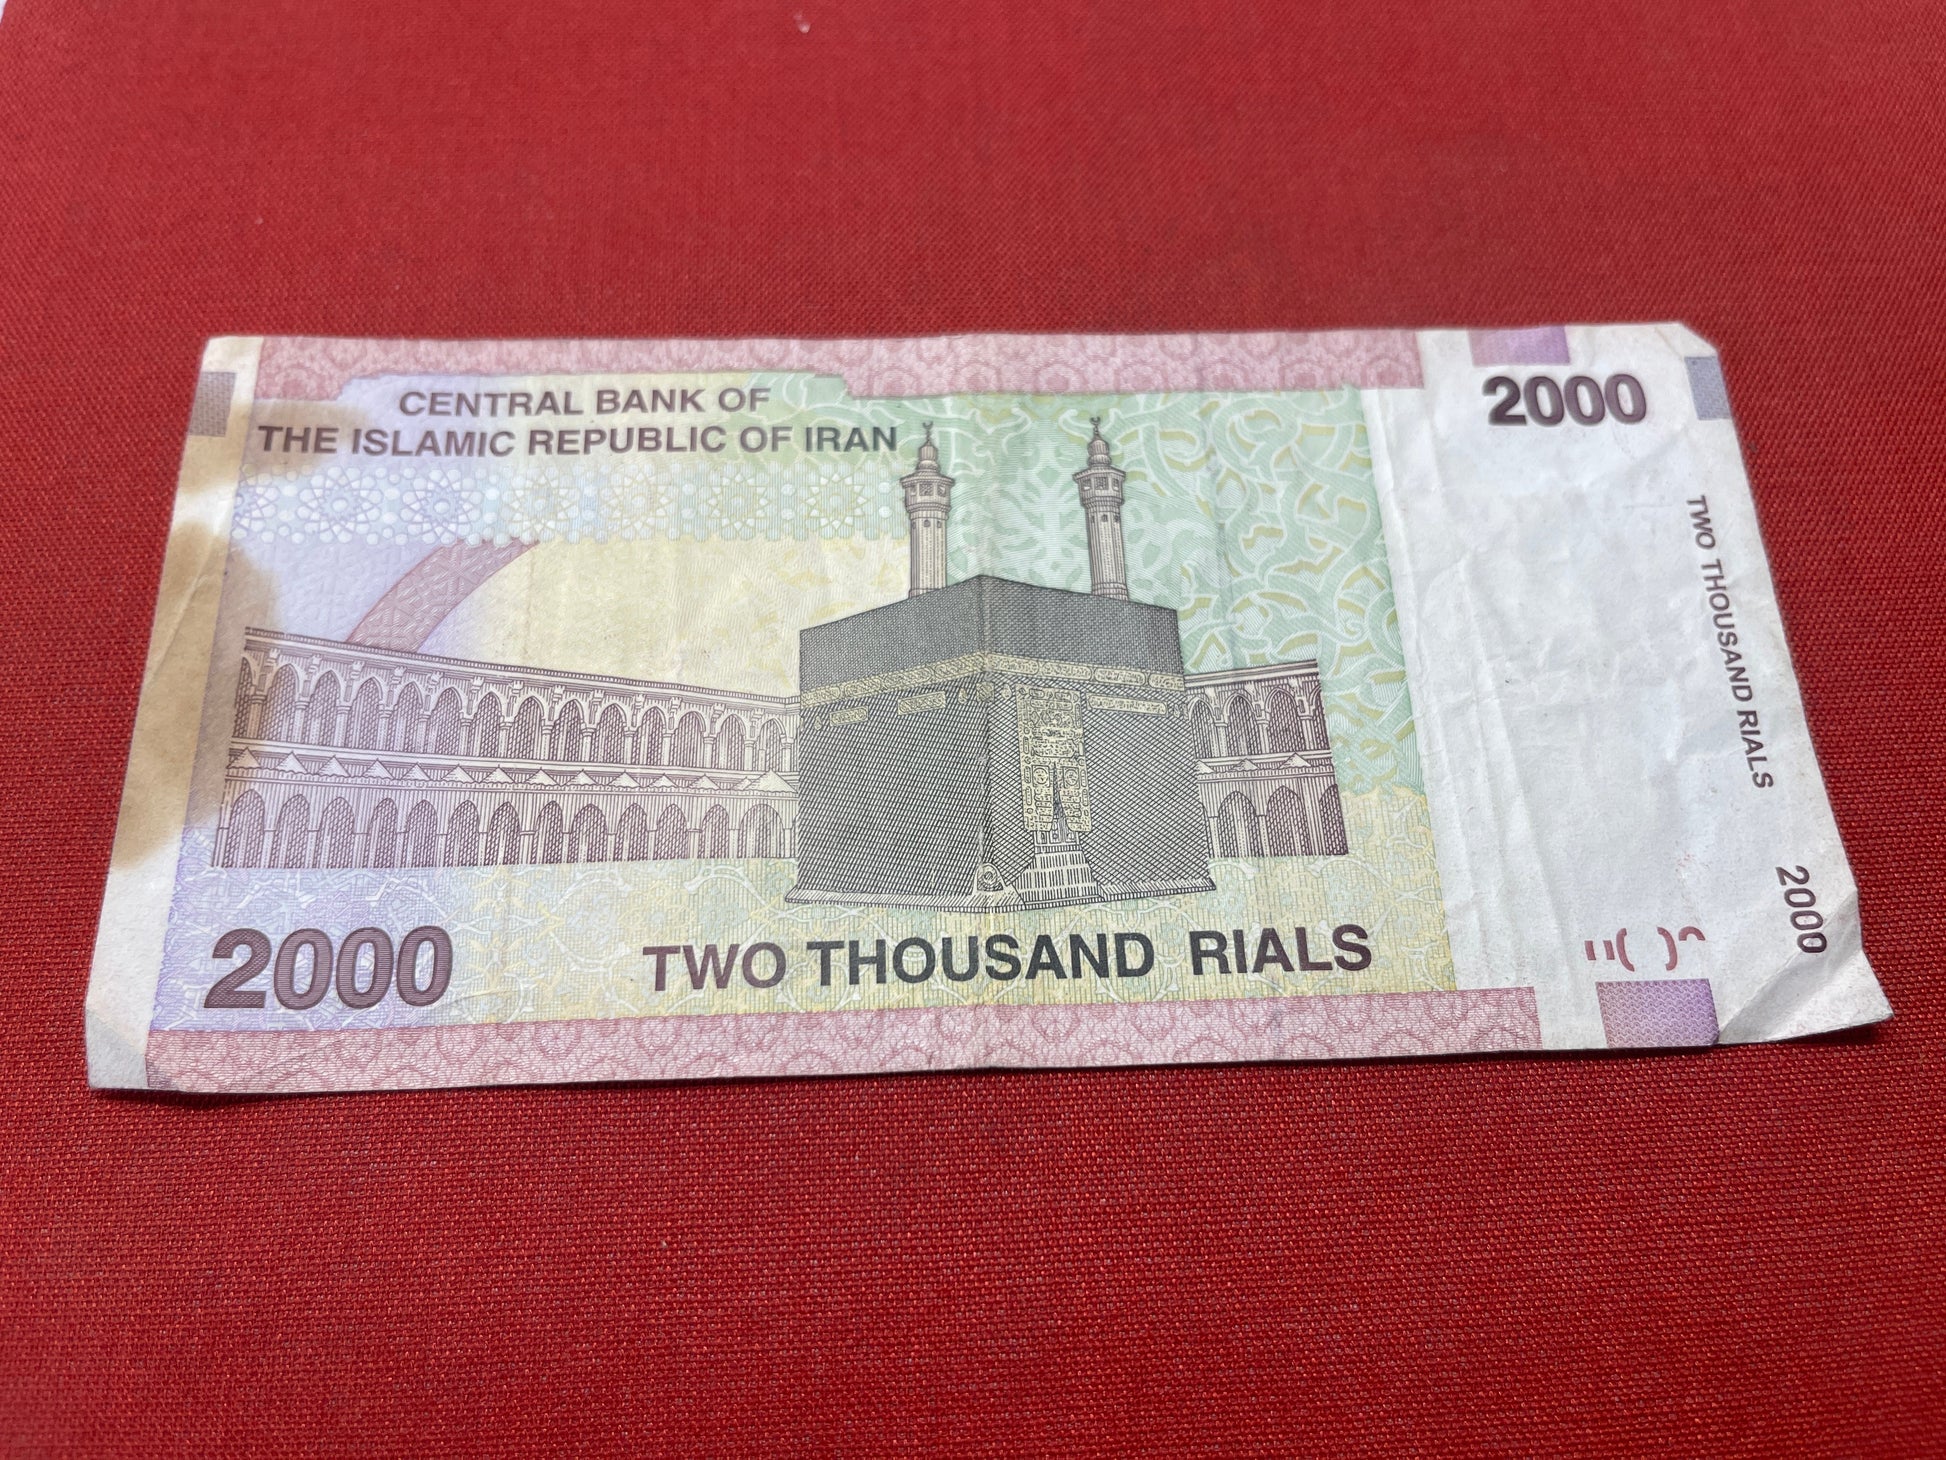 Central Bank of The Islamic Republic of Iran 2000 Rials